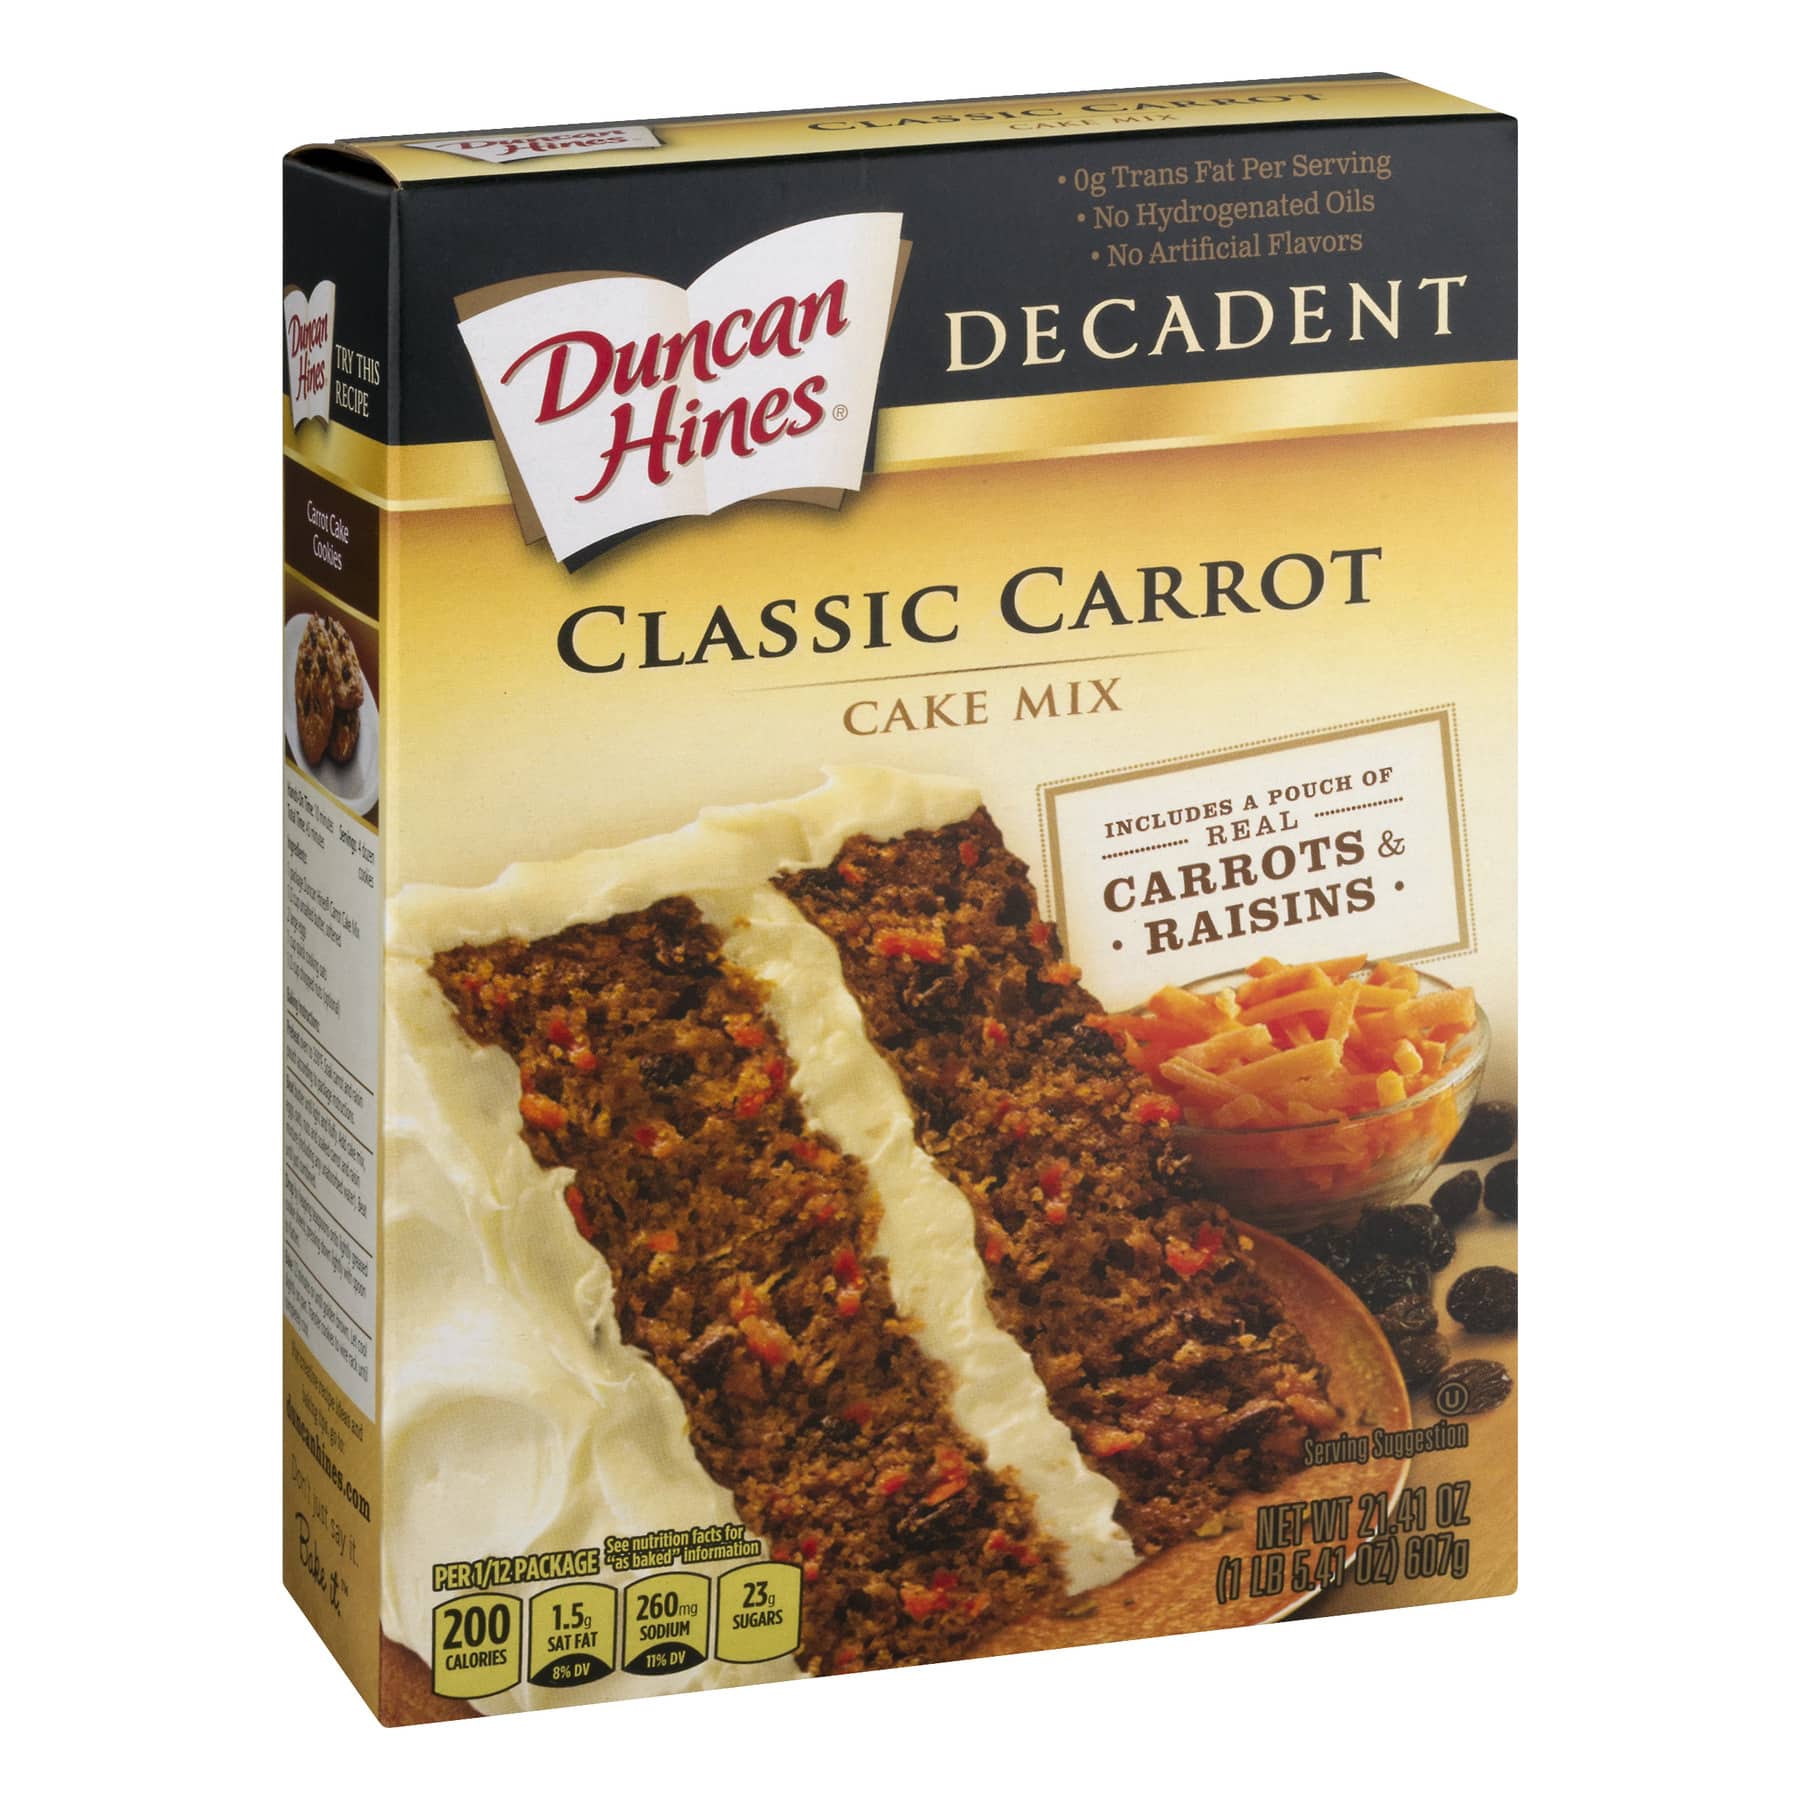 What Happened To Duncan Hines's Decadent Carrot Cake Mix?